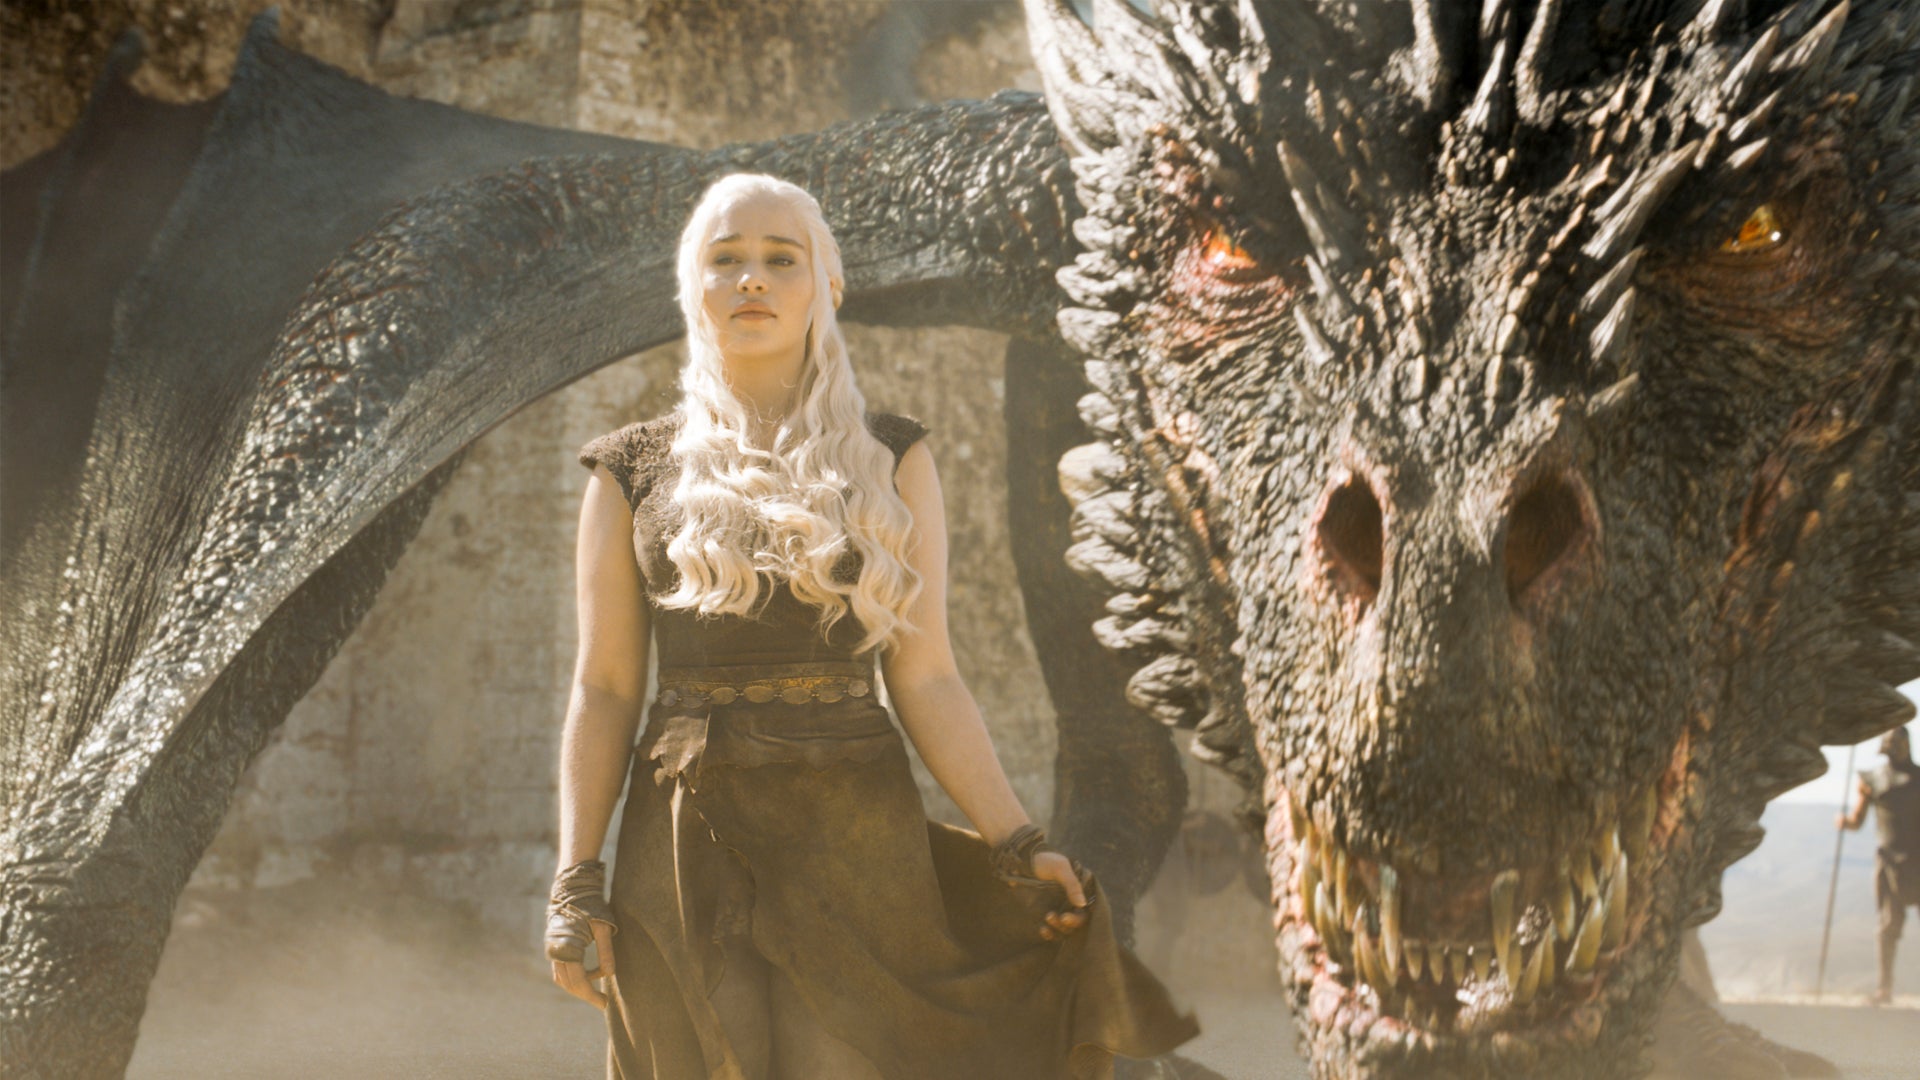 Emilia Clarke as Daenerys in Game of Thrones (HBO/PA)